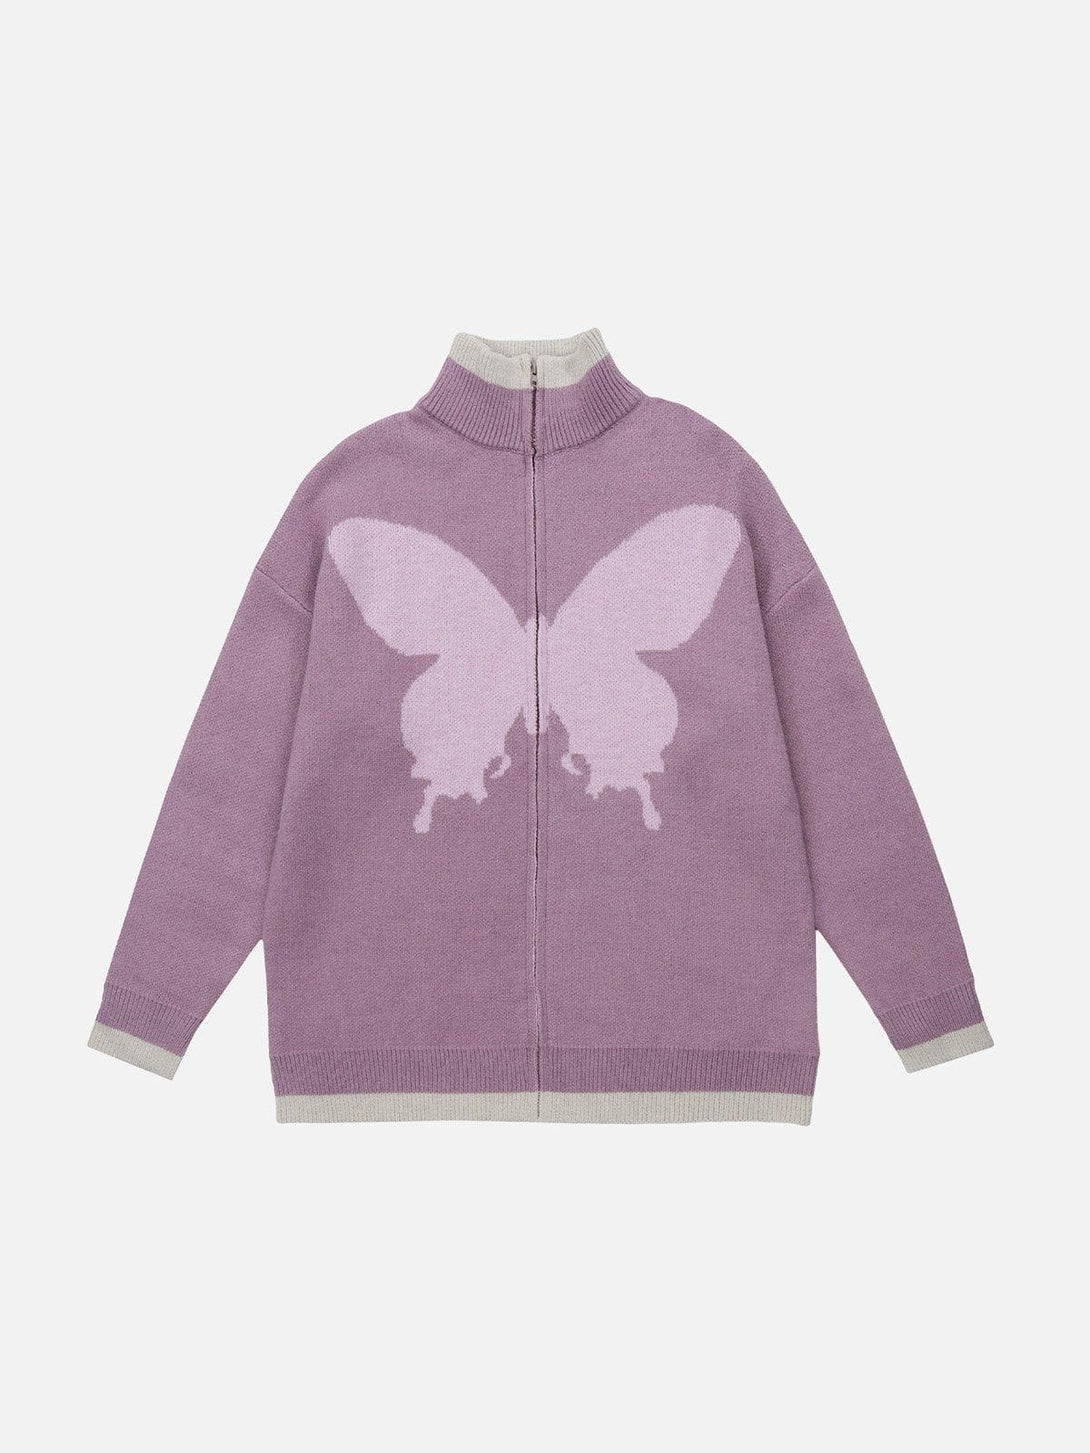 Levefly - Butterfly Embroidery Cardigan - Streetwear Fashion - levefly.com